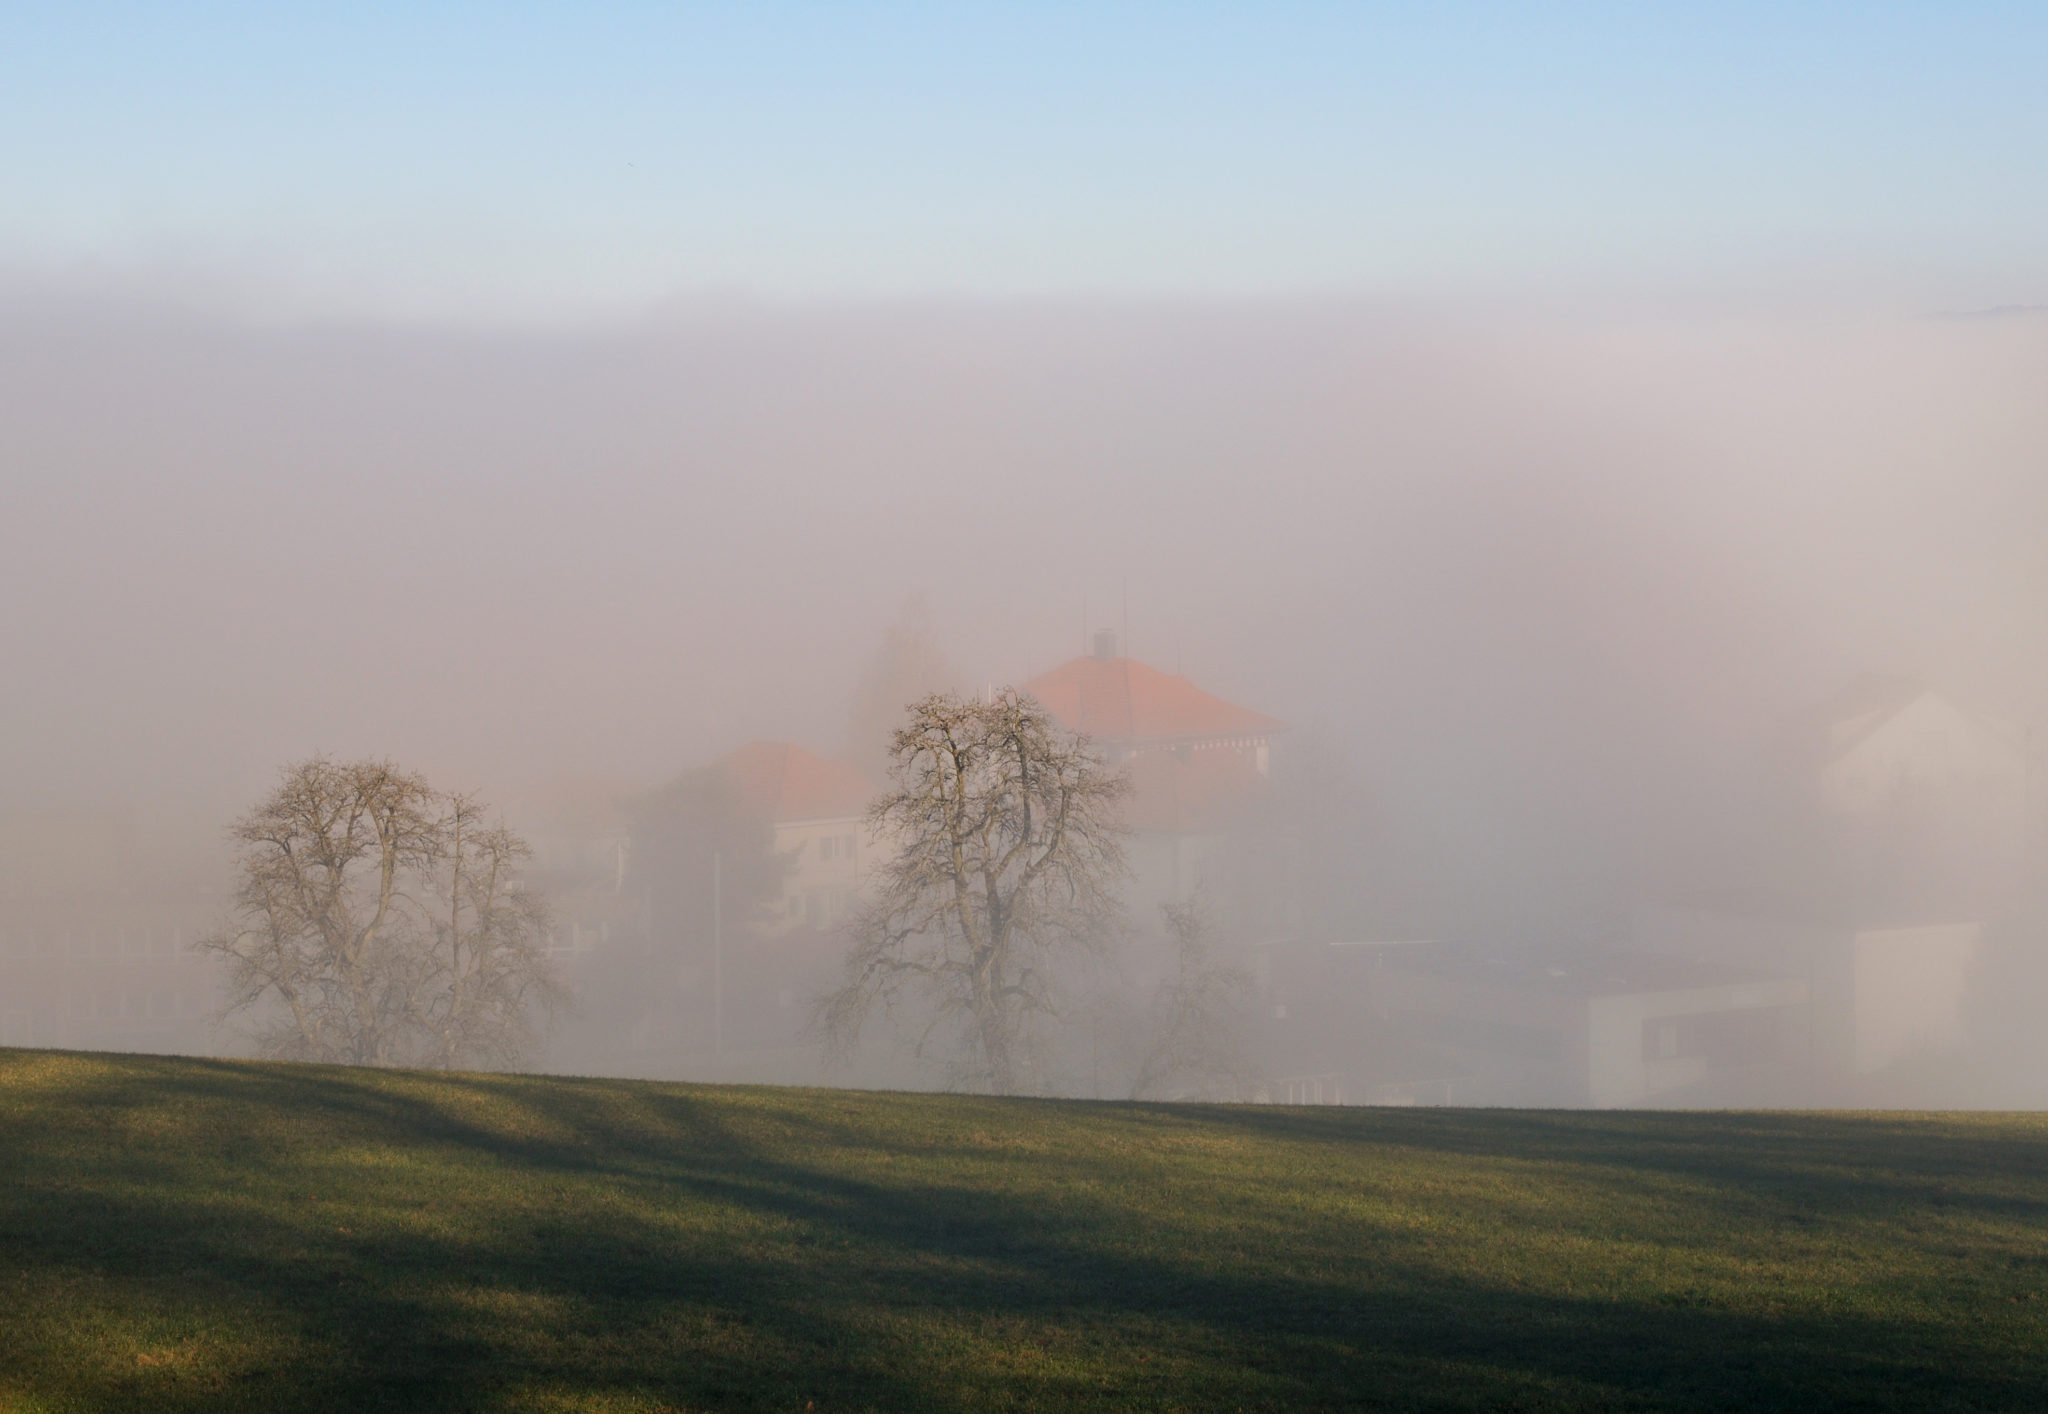 The foggy pastoral